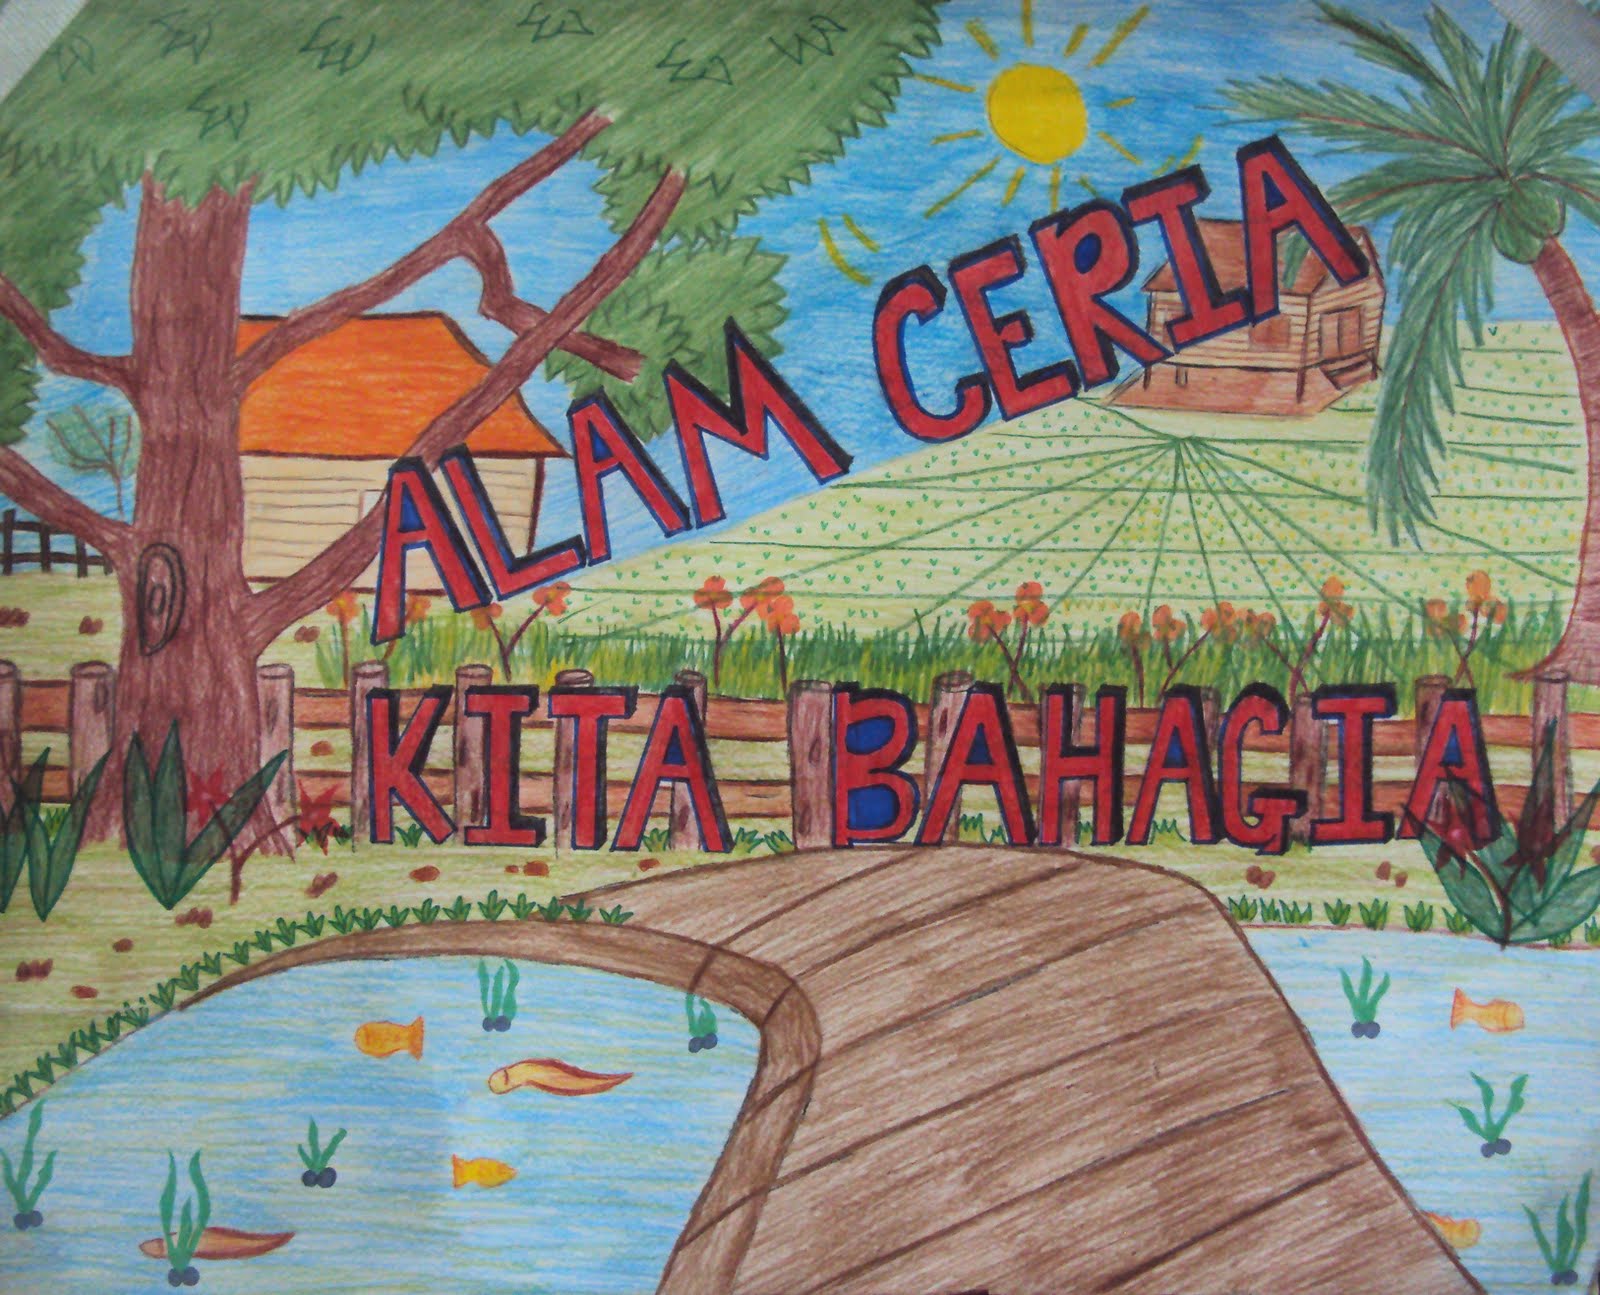 English and Arts Resources Alam  Ceria School Poster  